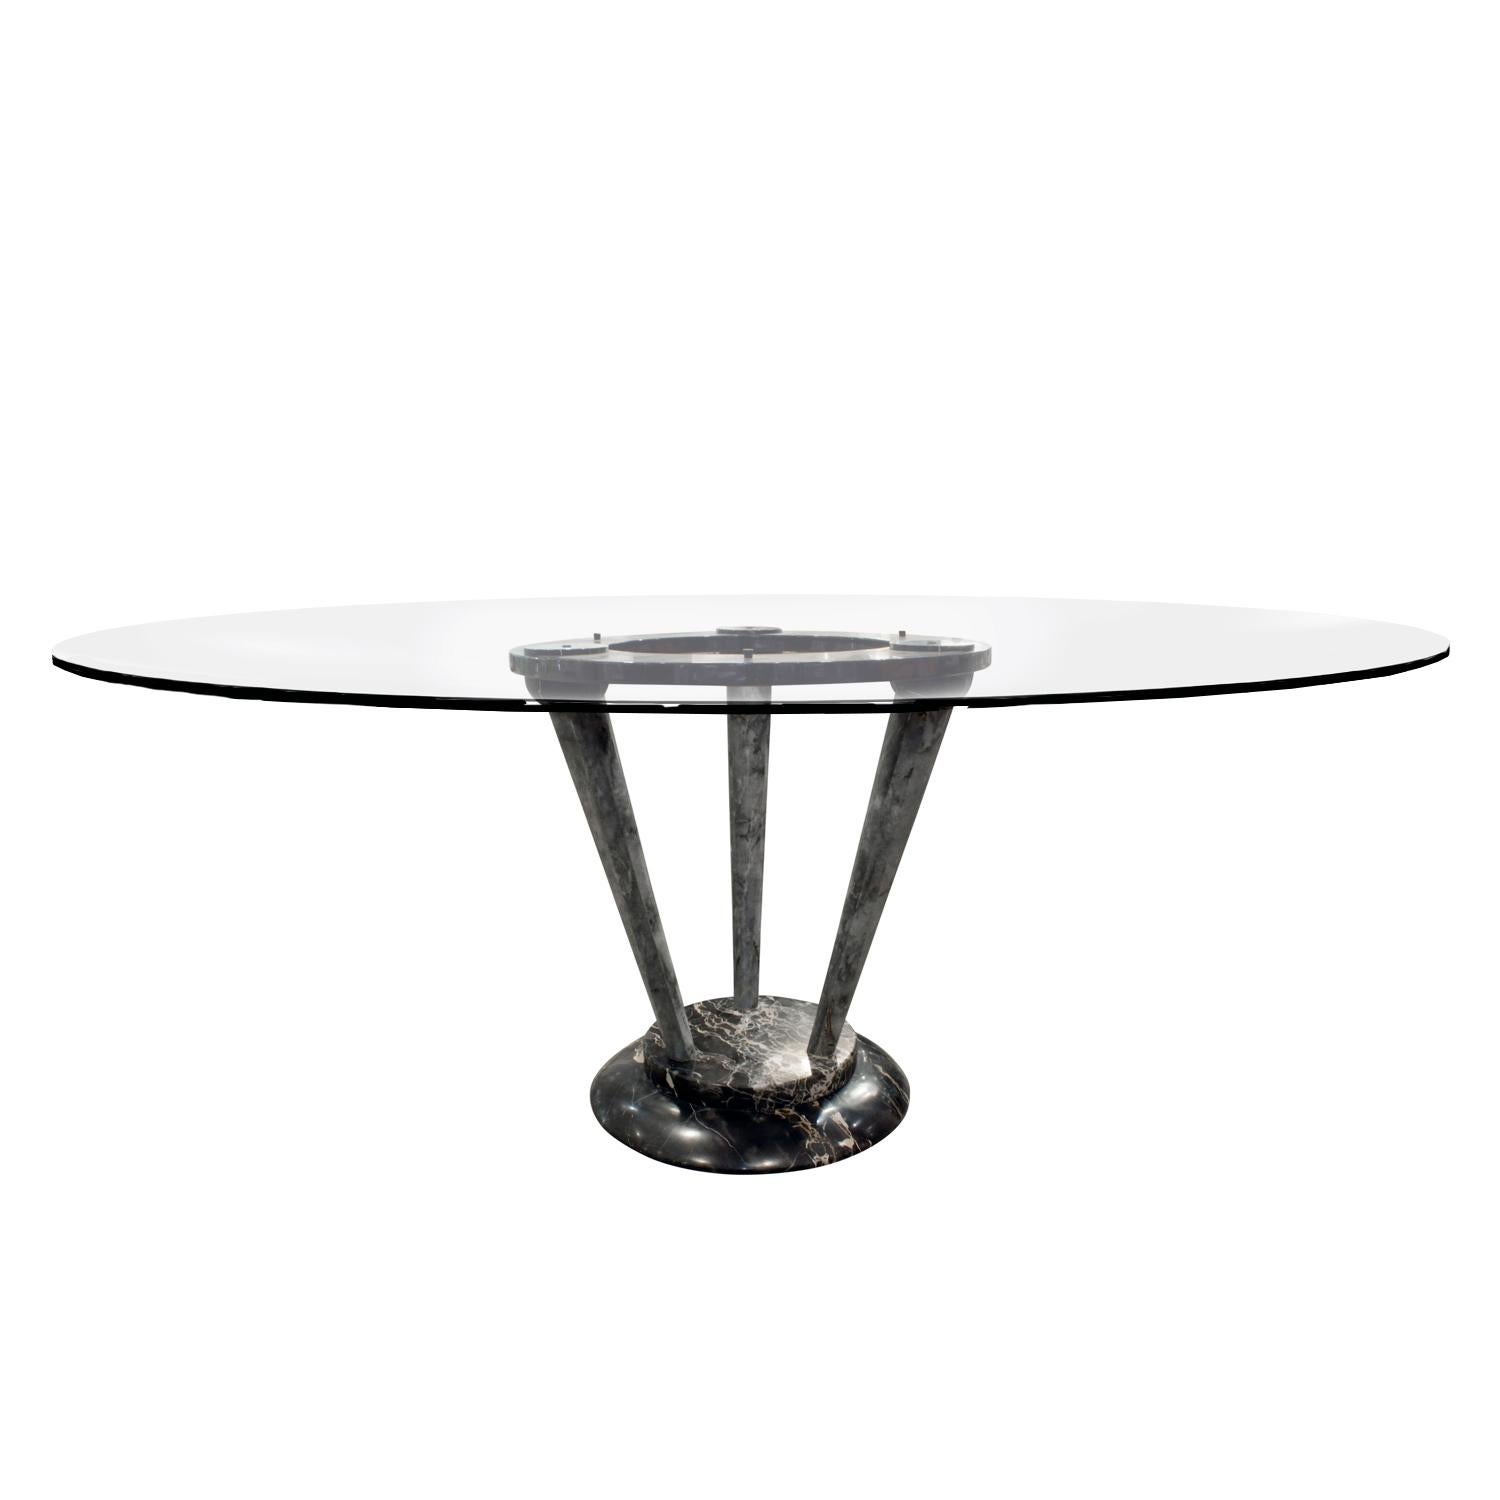 Sculptural pedestal dining table in figured black marble with round glass top, Italian, 1970s. This table would also work as an entry or hall table. It's a beautiful and elegant design.